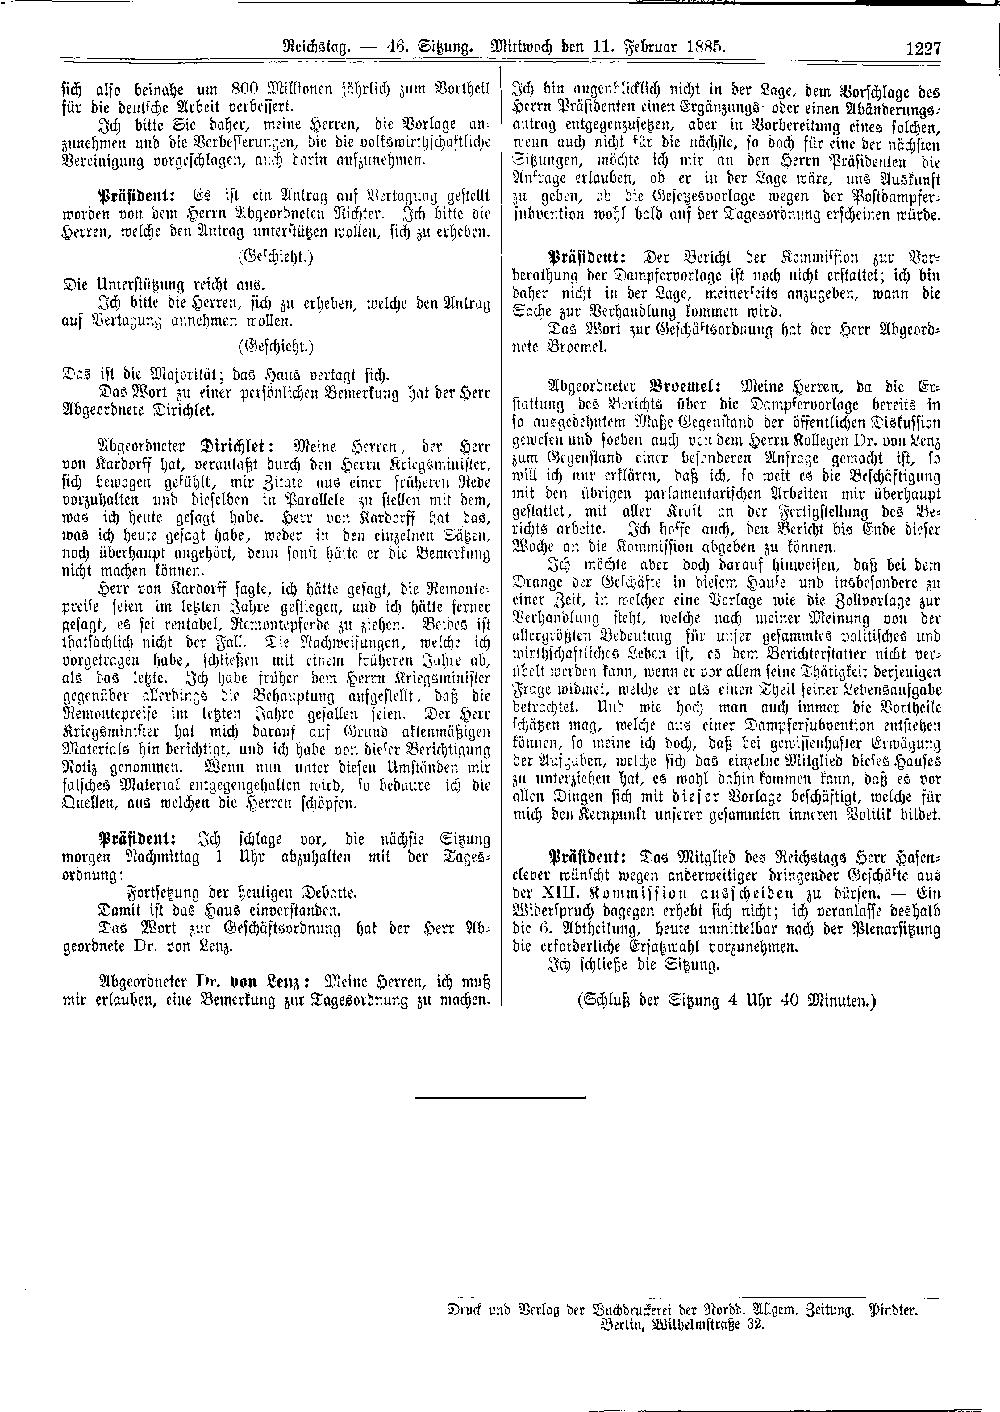 Scan of page 1227